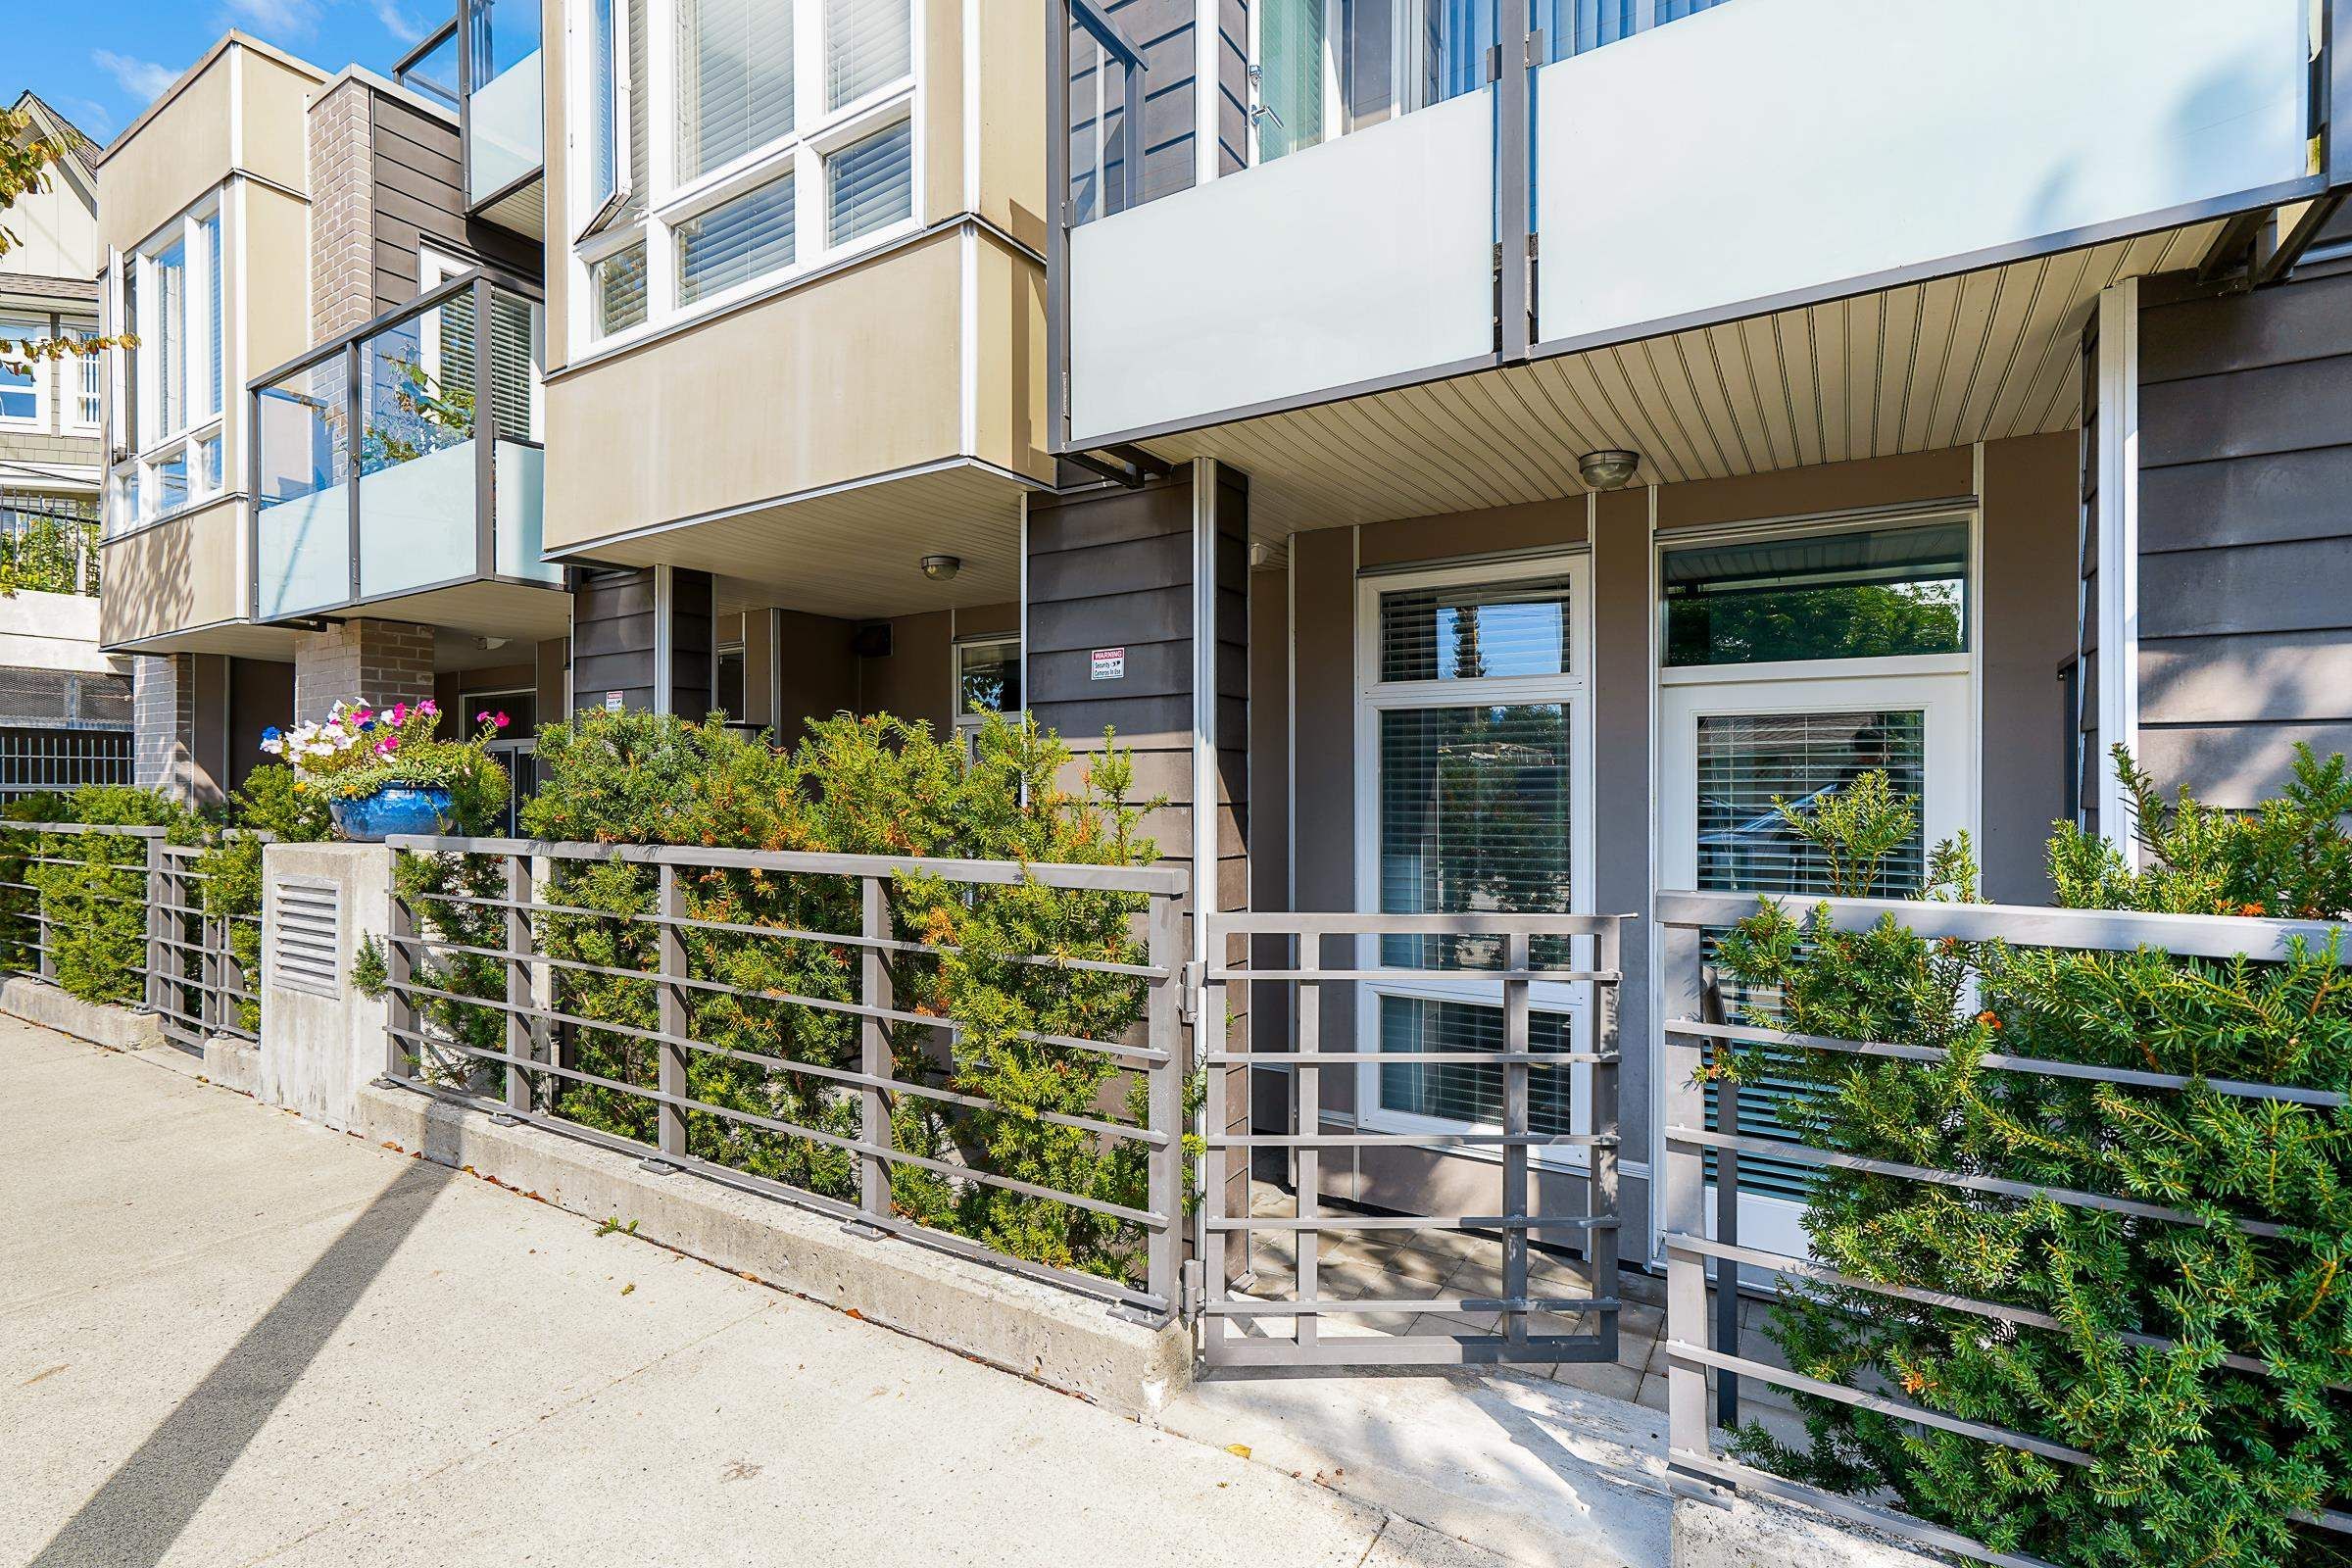 Main Photo: 116 85 EIGHTH AVENUE in New Westminster: GlenBrooke North Townhouse for sale : MLS®# R2617347